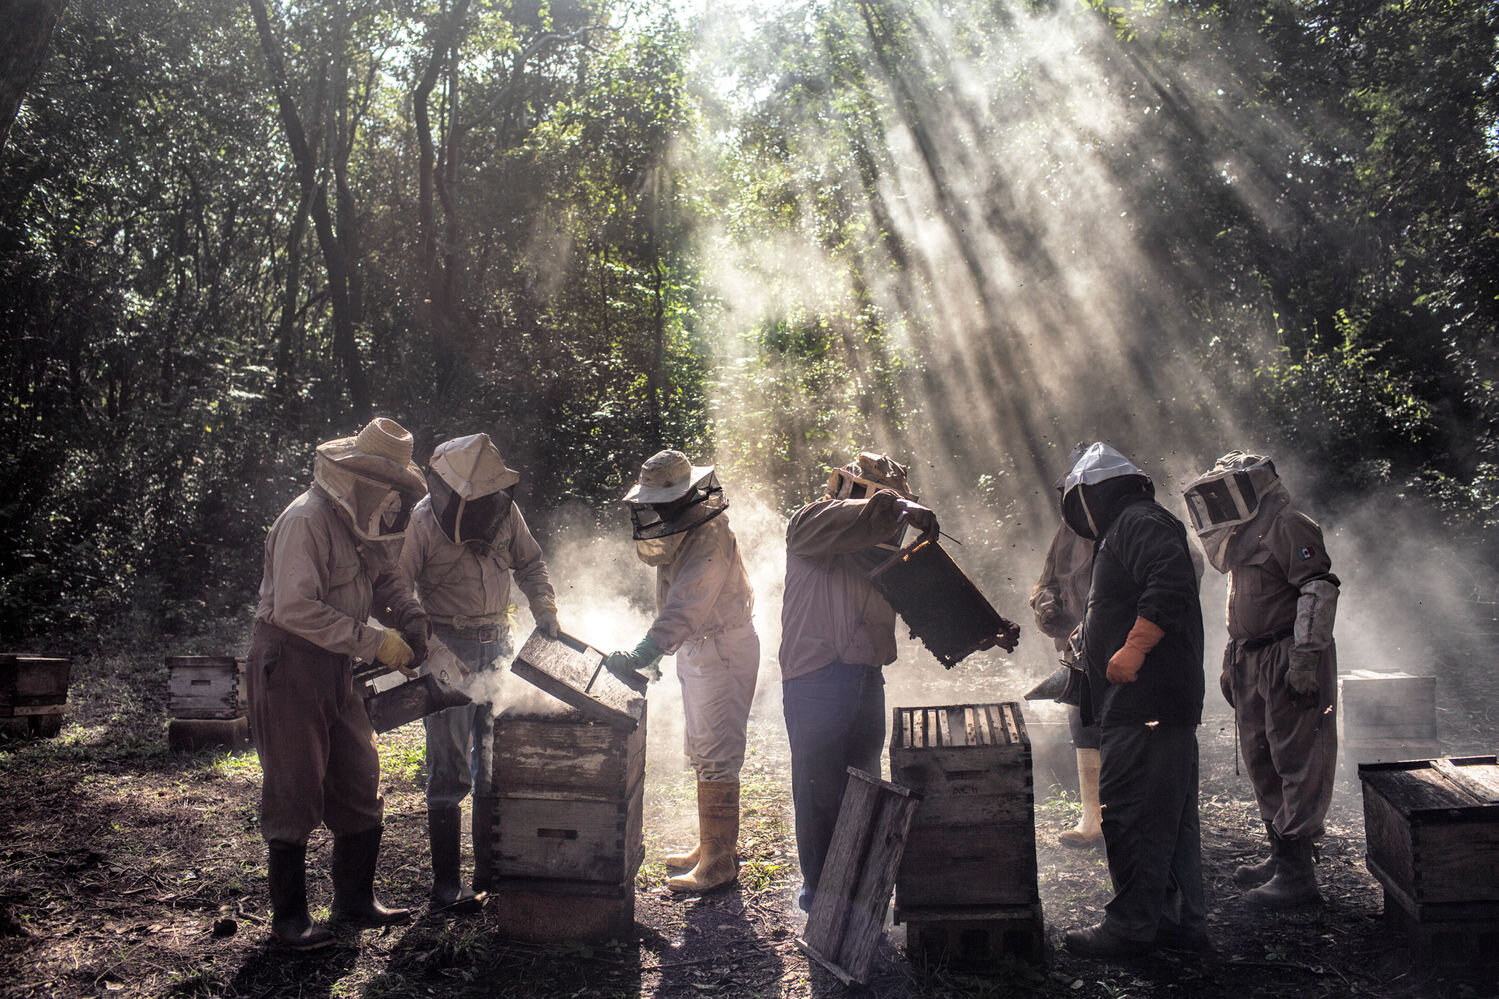  A group of beekeepers tending to their hives in the off-season while the bees are getting ready to start pollinating flowers. The group is led by Professor Russel Armin Balan, who has been certified by a course in producing organic honey. Tínun, Mexico, 2018. 